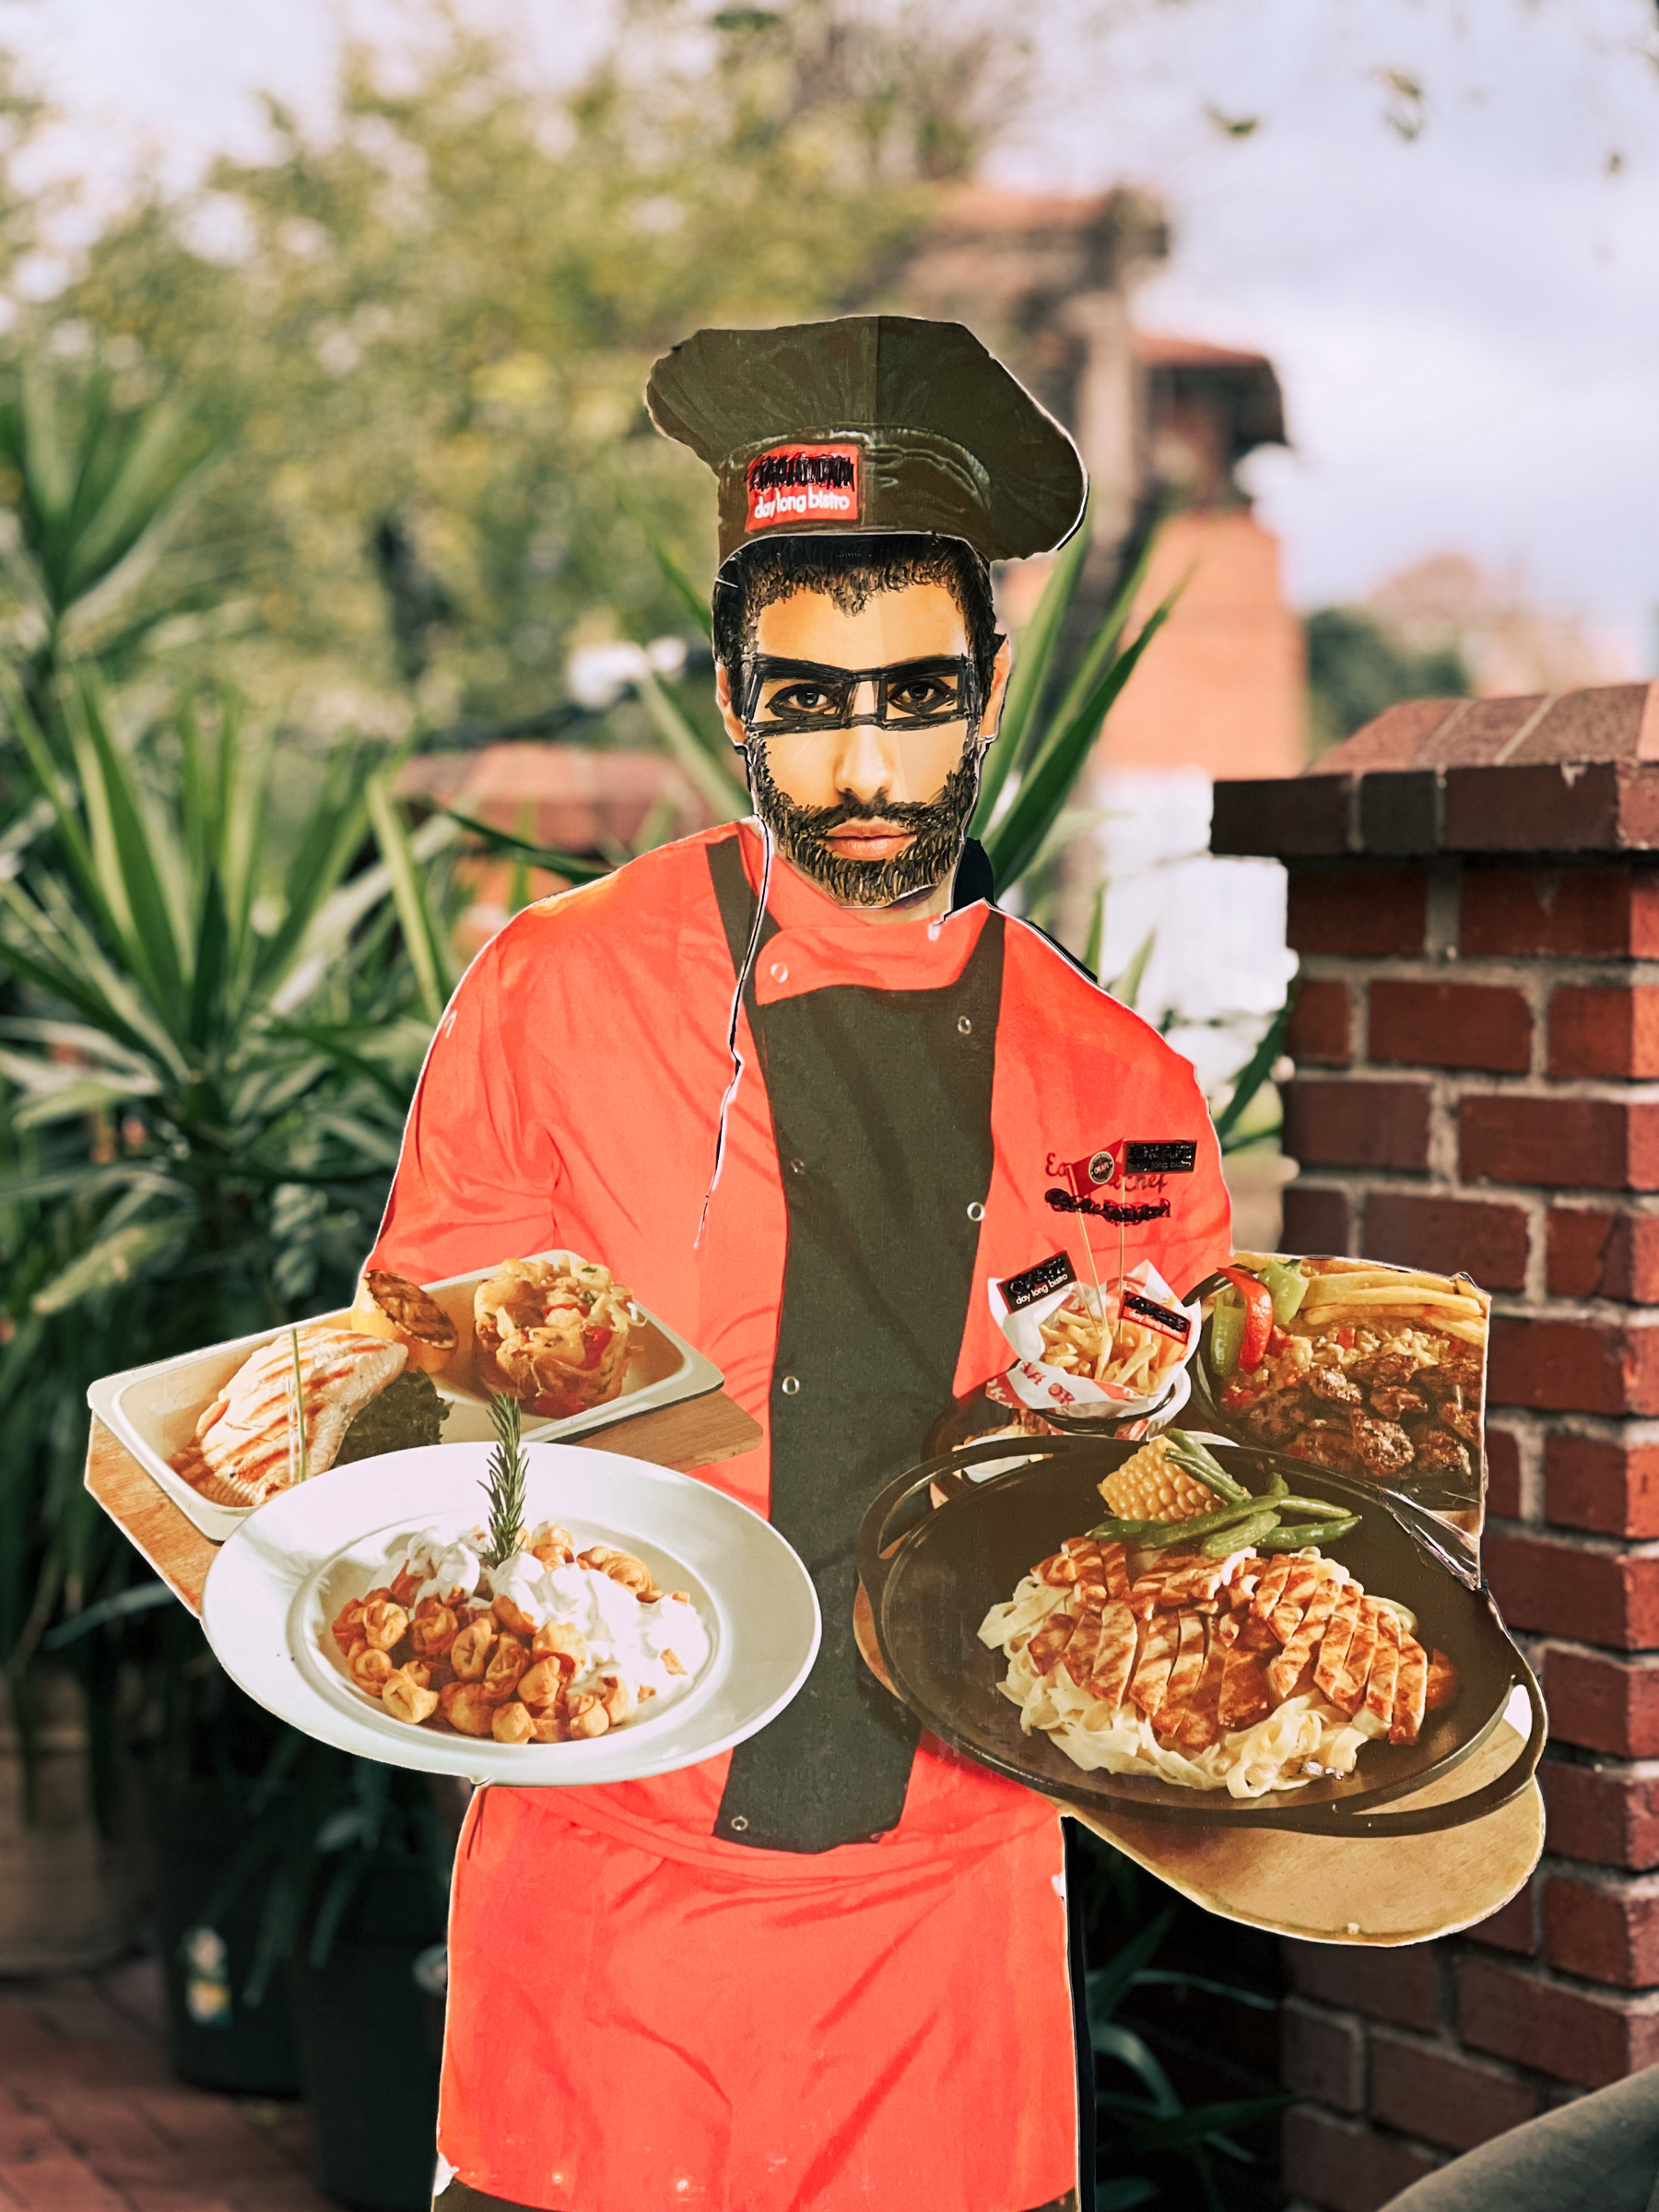 A creepy ad for a restaurant, a man holding food with a painted beard.